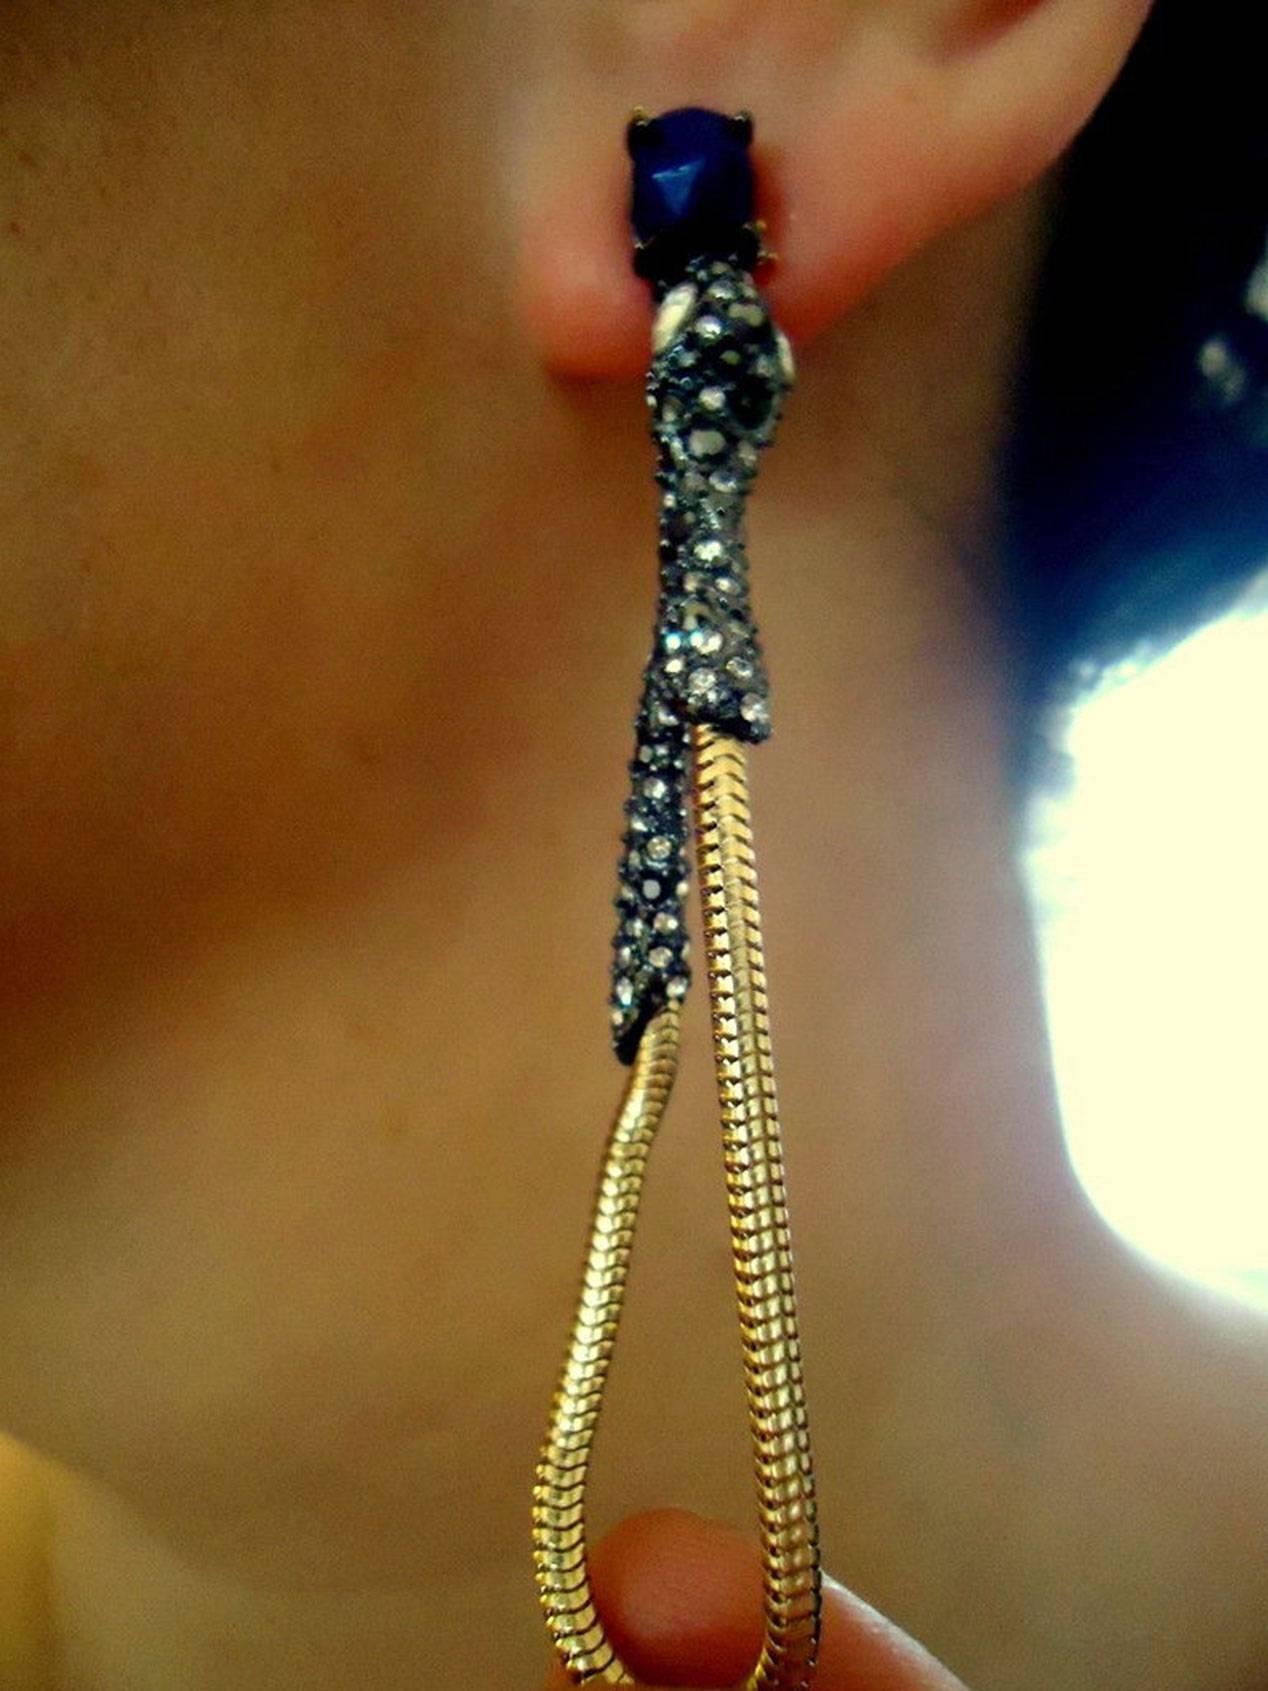 Exotic Snake Serpent earrings…So Sexy and Stunning dangling from the ears at a runway length of approx. 2 3/4”; the heads fully encrusted with sparkling black, grey and clear crystals followed by a hoop style gold gilt Snake chain. Signed AB for